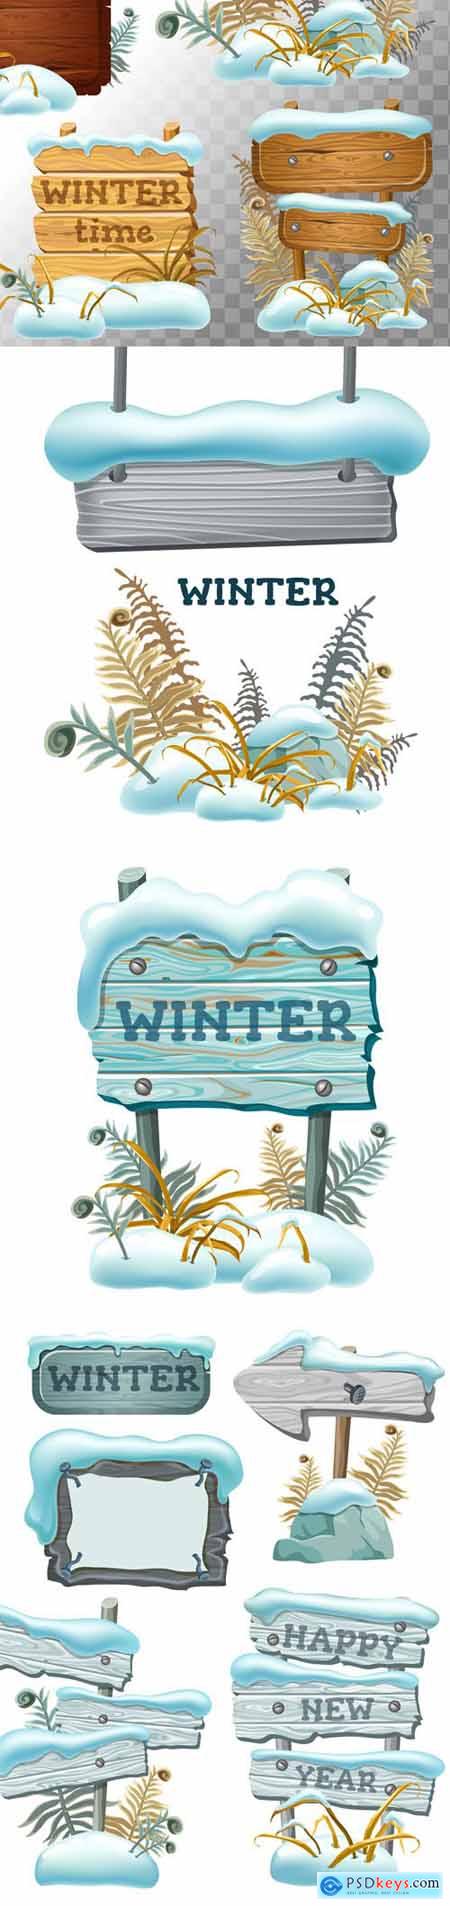 Advertising Boards with Snow Vector Templates